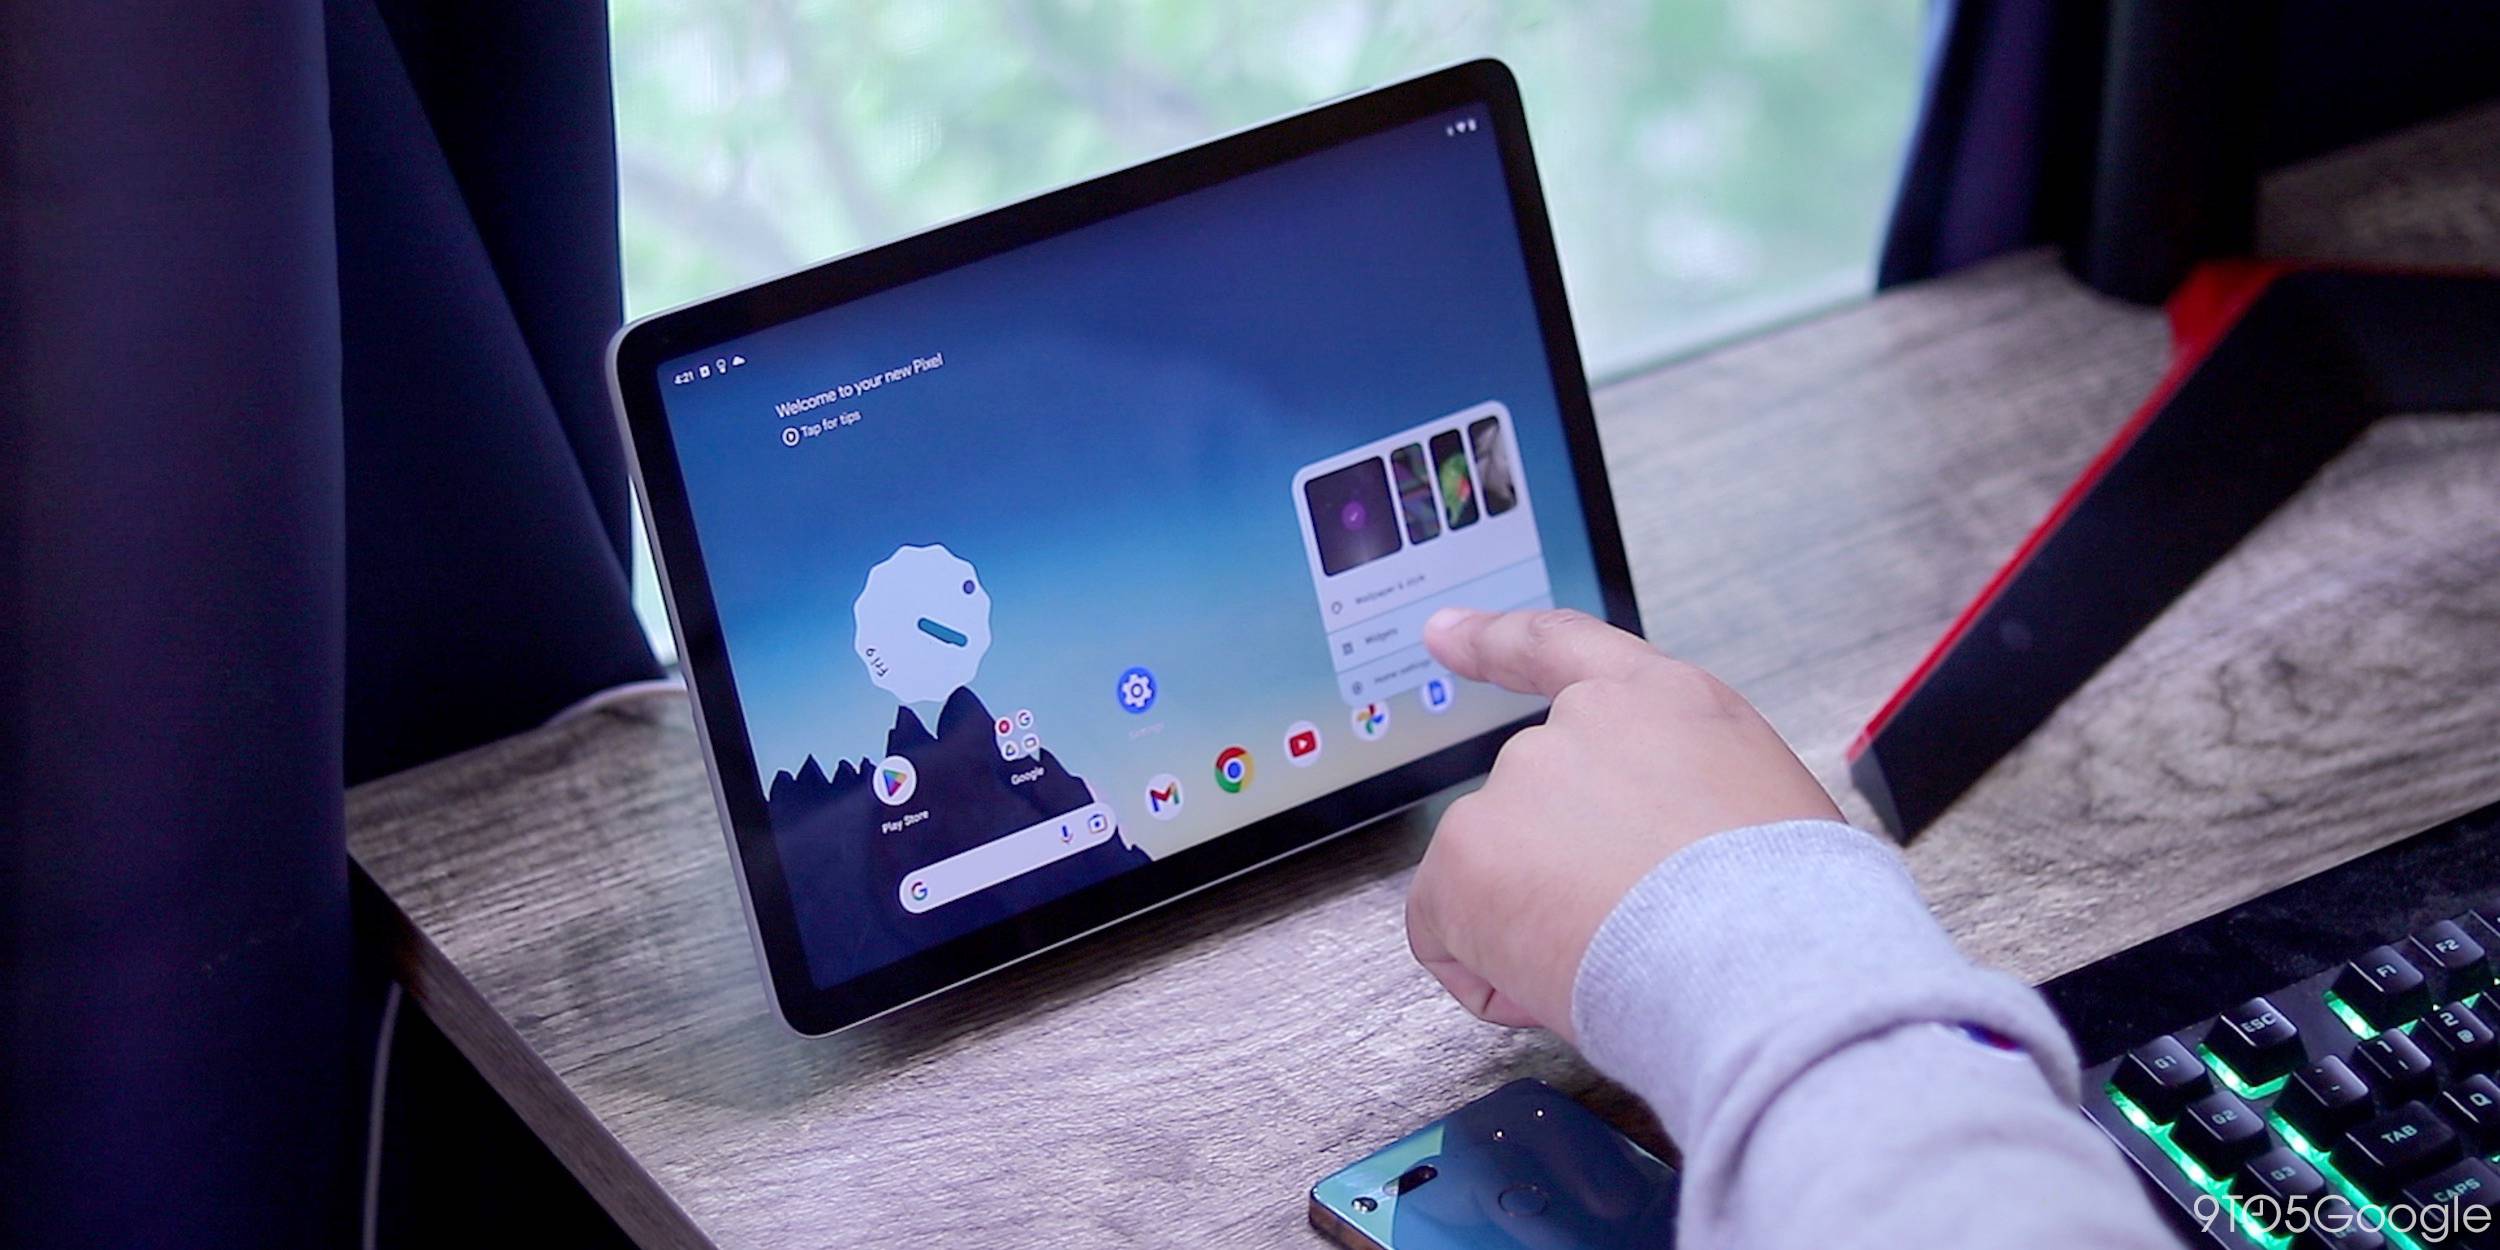 Pixel Tablet is practically free with trade-in at Best Buy